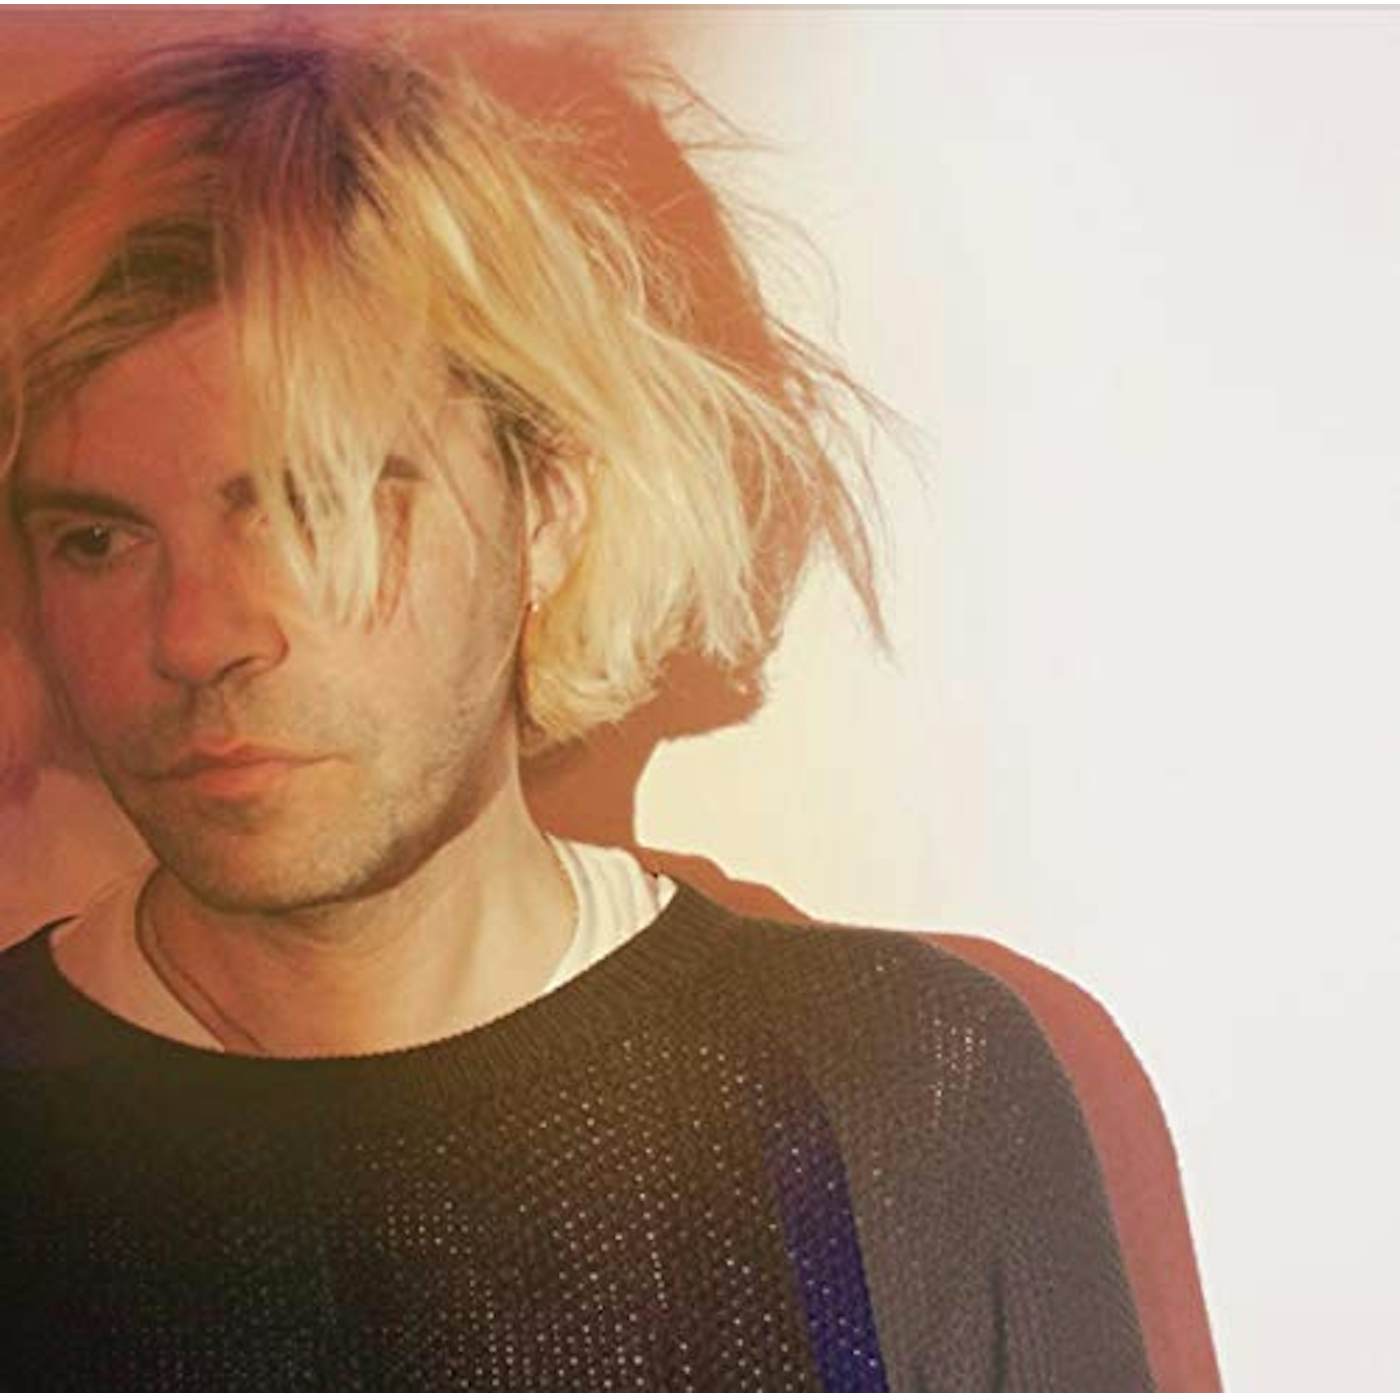 Tim Burgess As I Was Now Vinyl Record